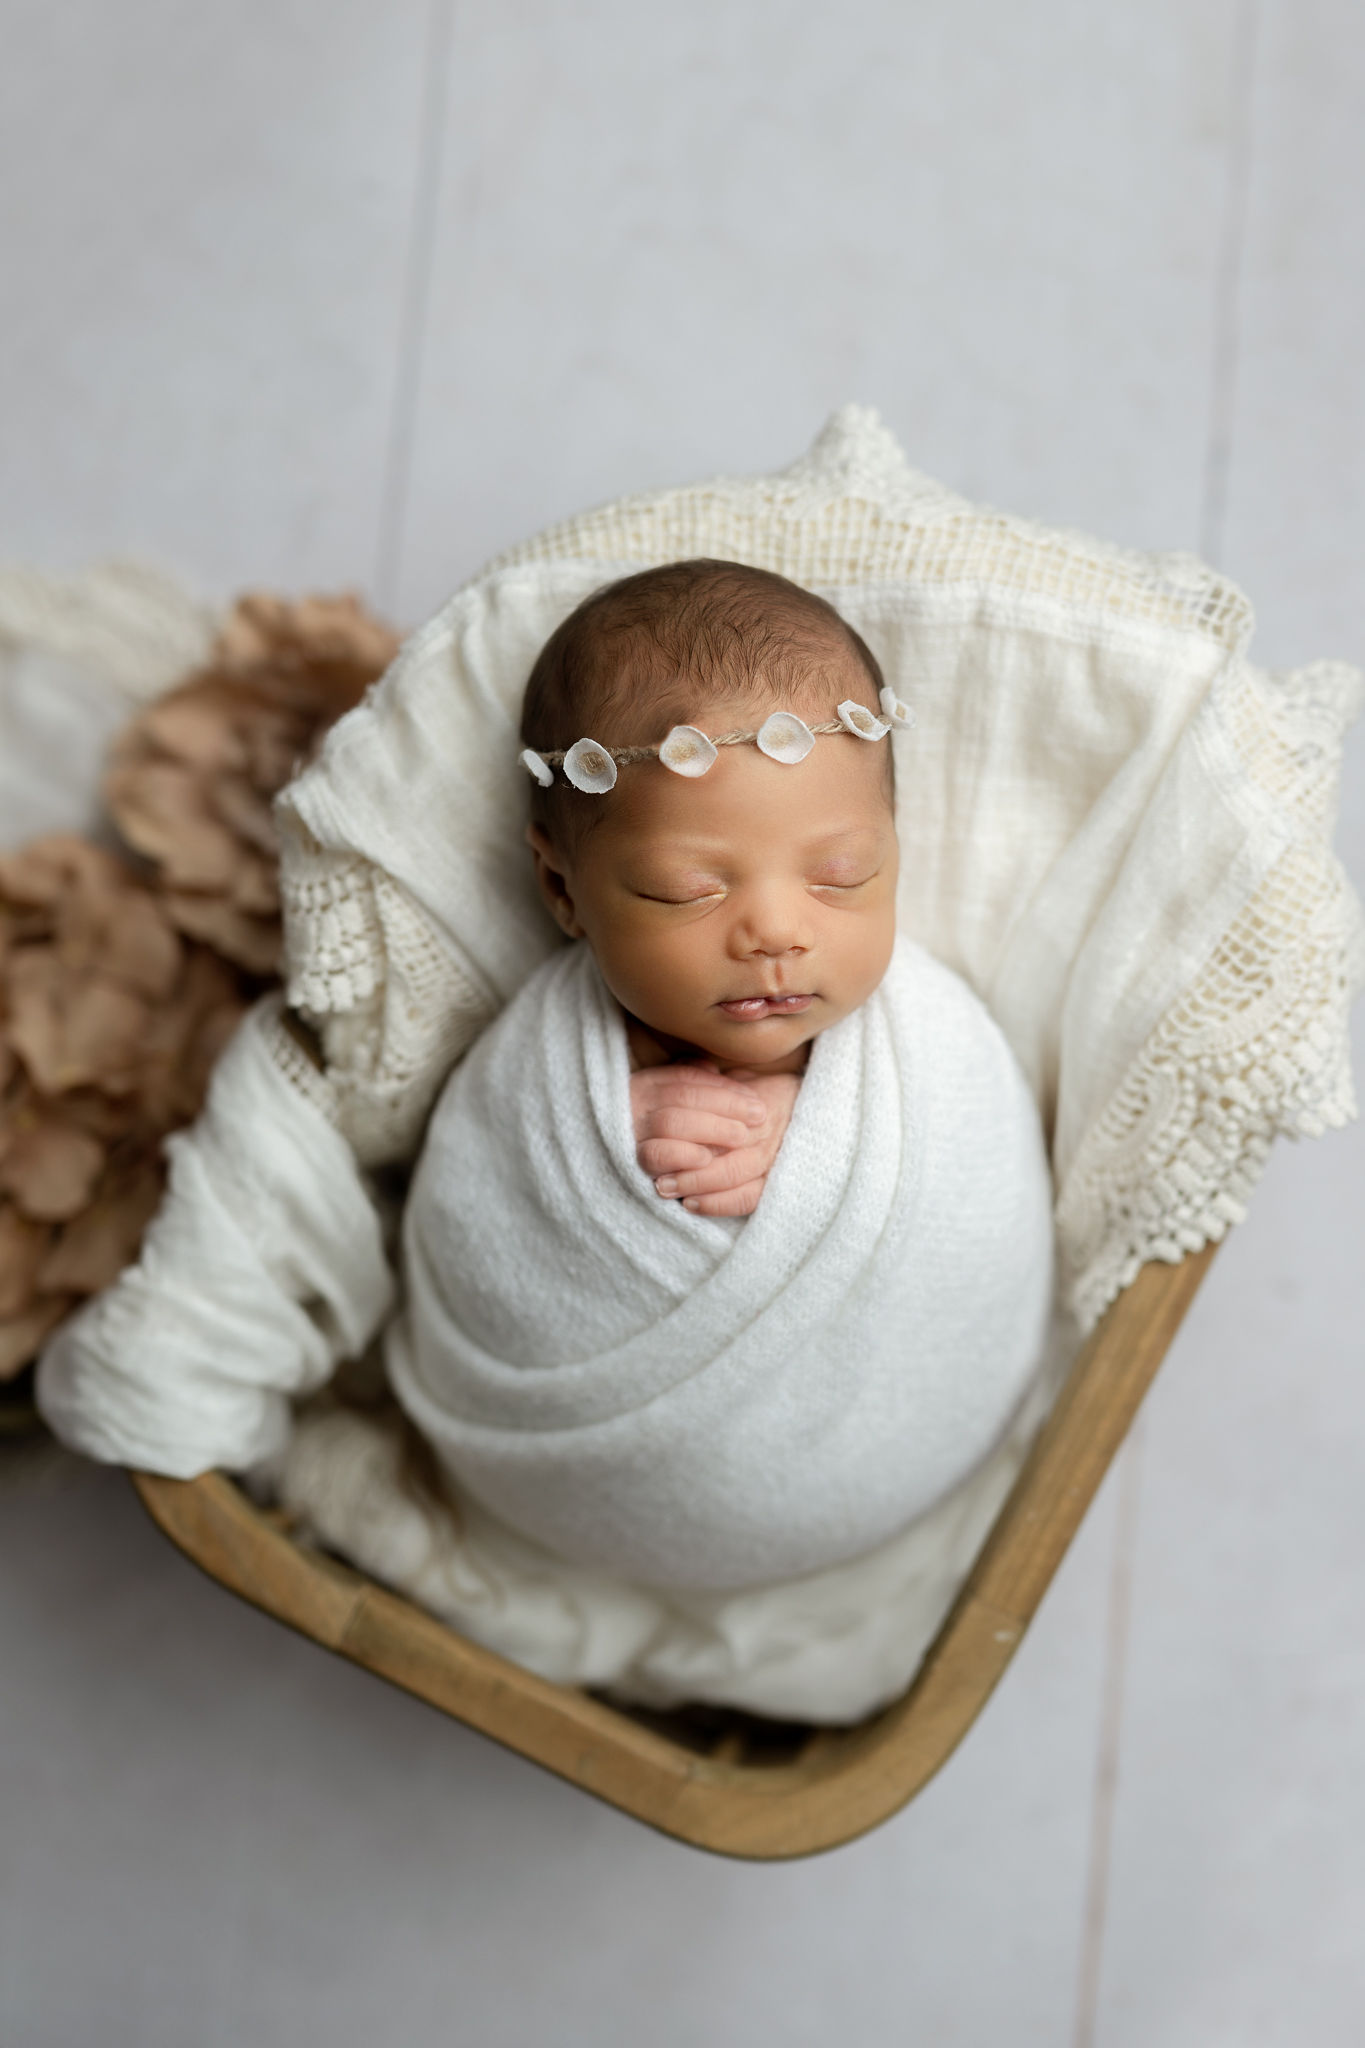 Newborn baby sleeps in a white swaddle positioned in a wooden basket